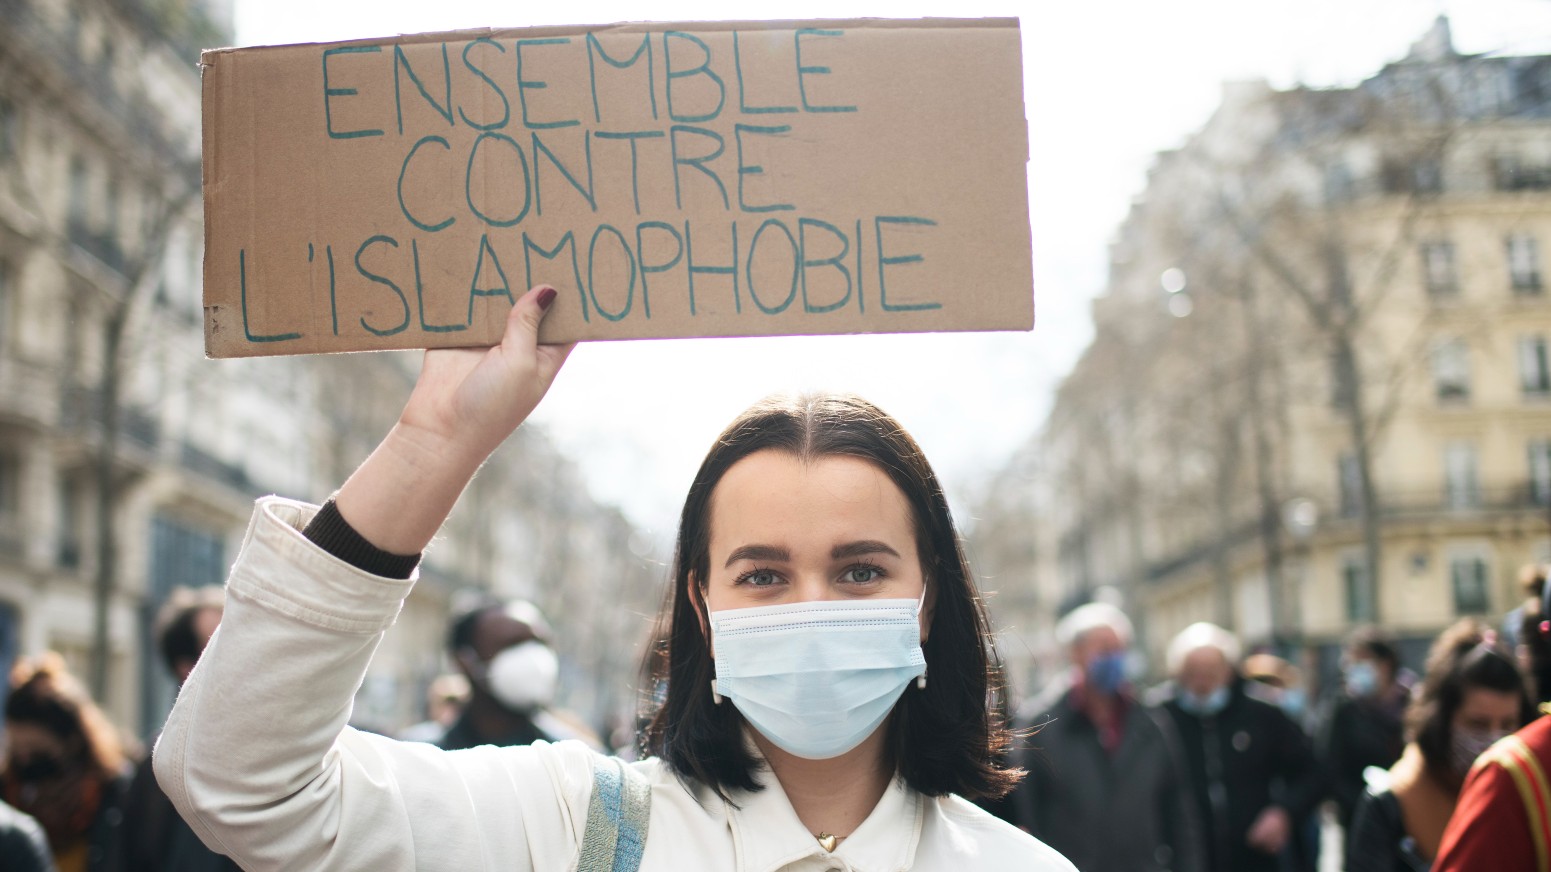 A protester during an anti-Islamophobia demonstration in Paris in March, 2022 (Reuters)